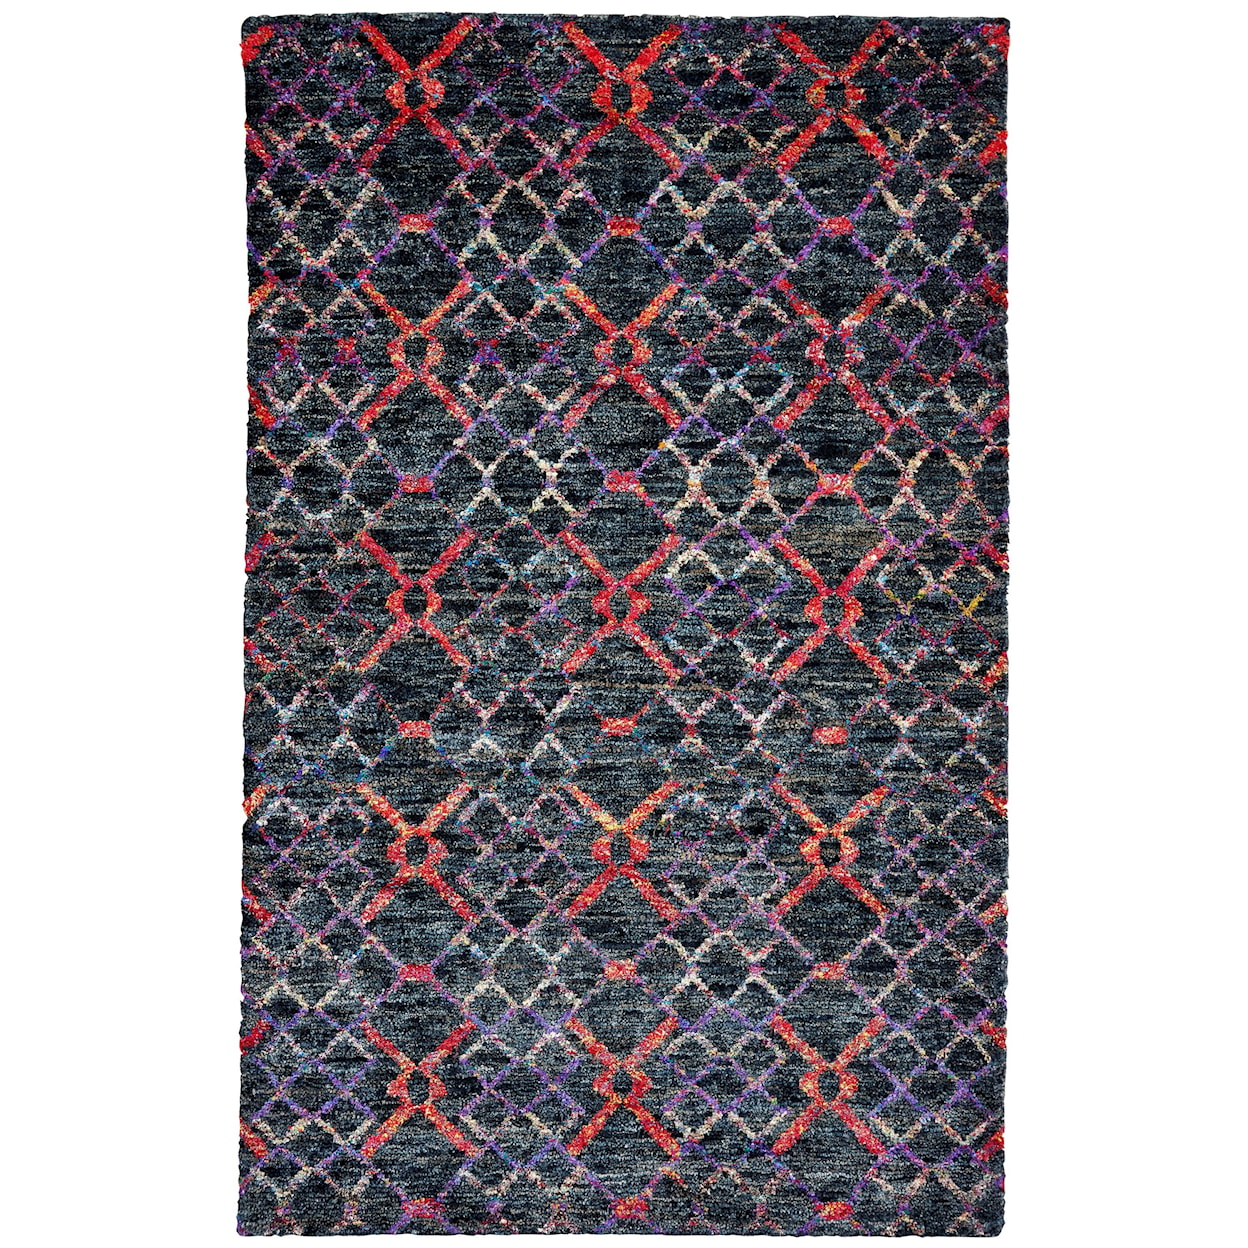 Feizy Rugs Tortola Flame 4' x 6' Area Rug